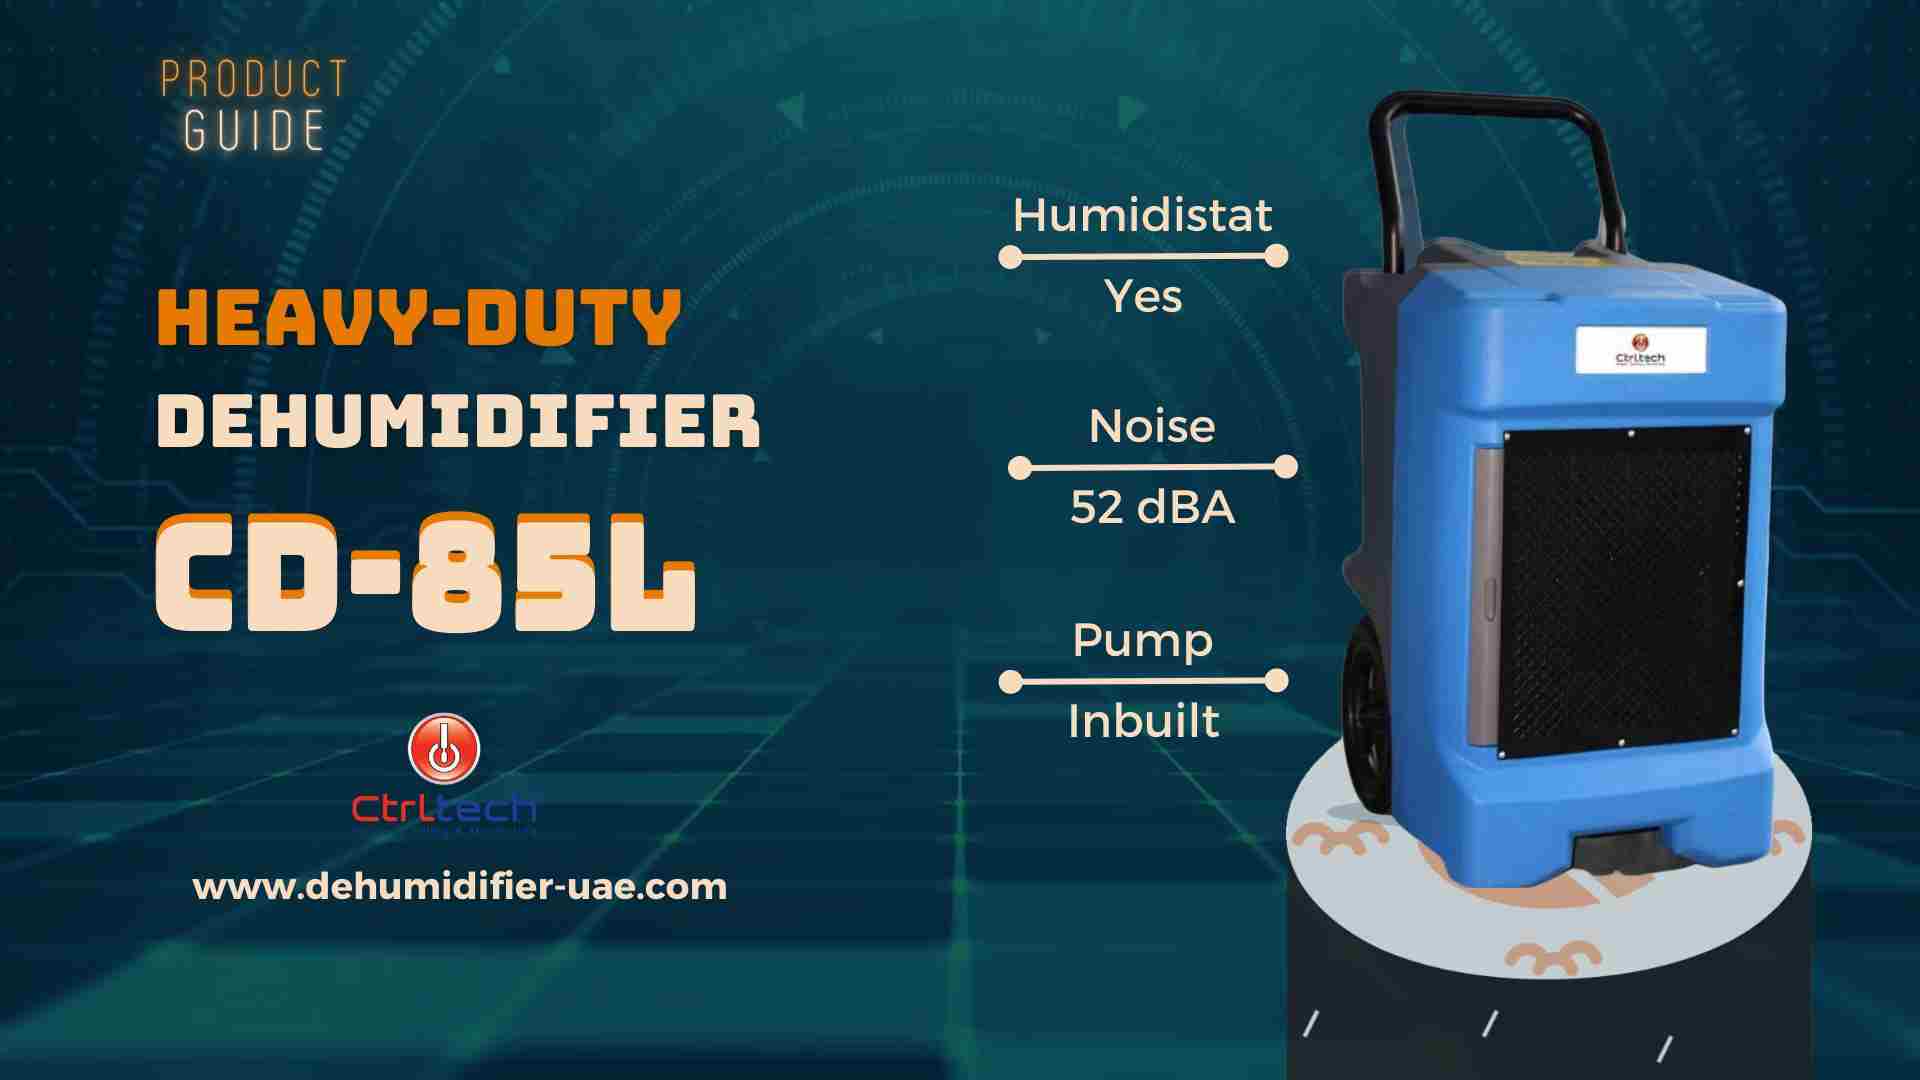 Operative methods of this industrial room dehumidifier